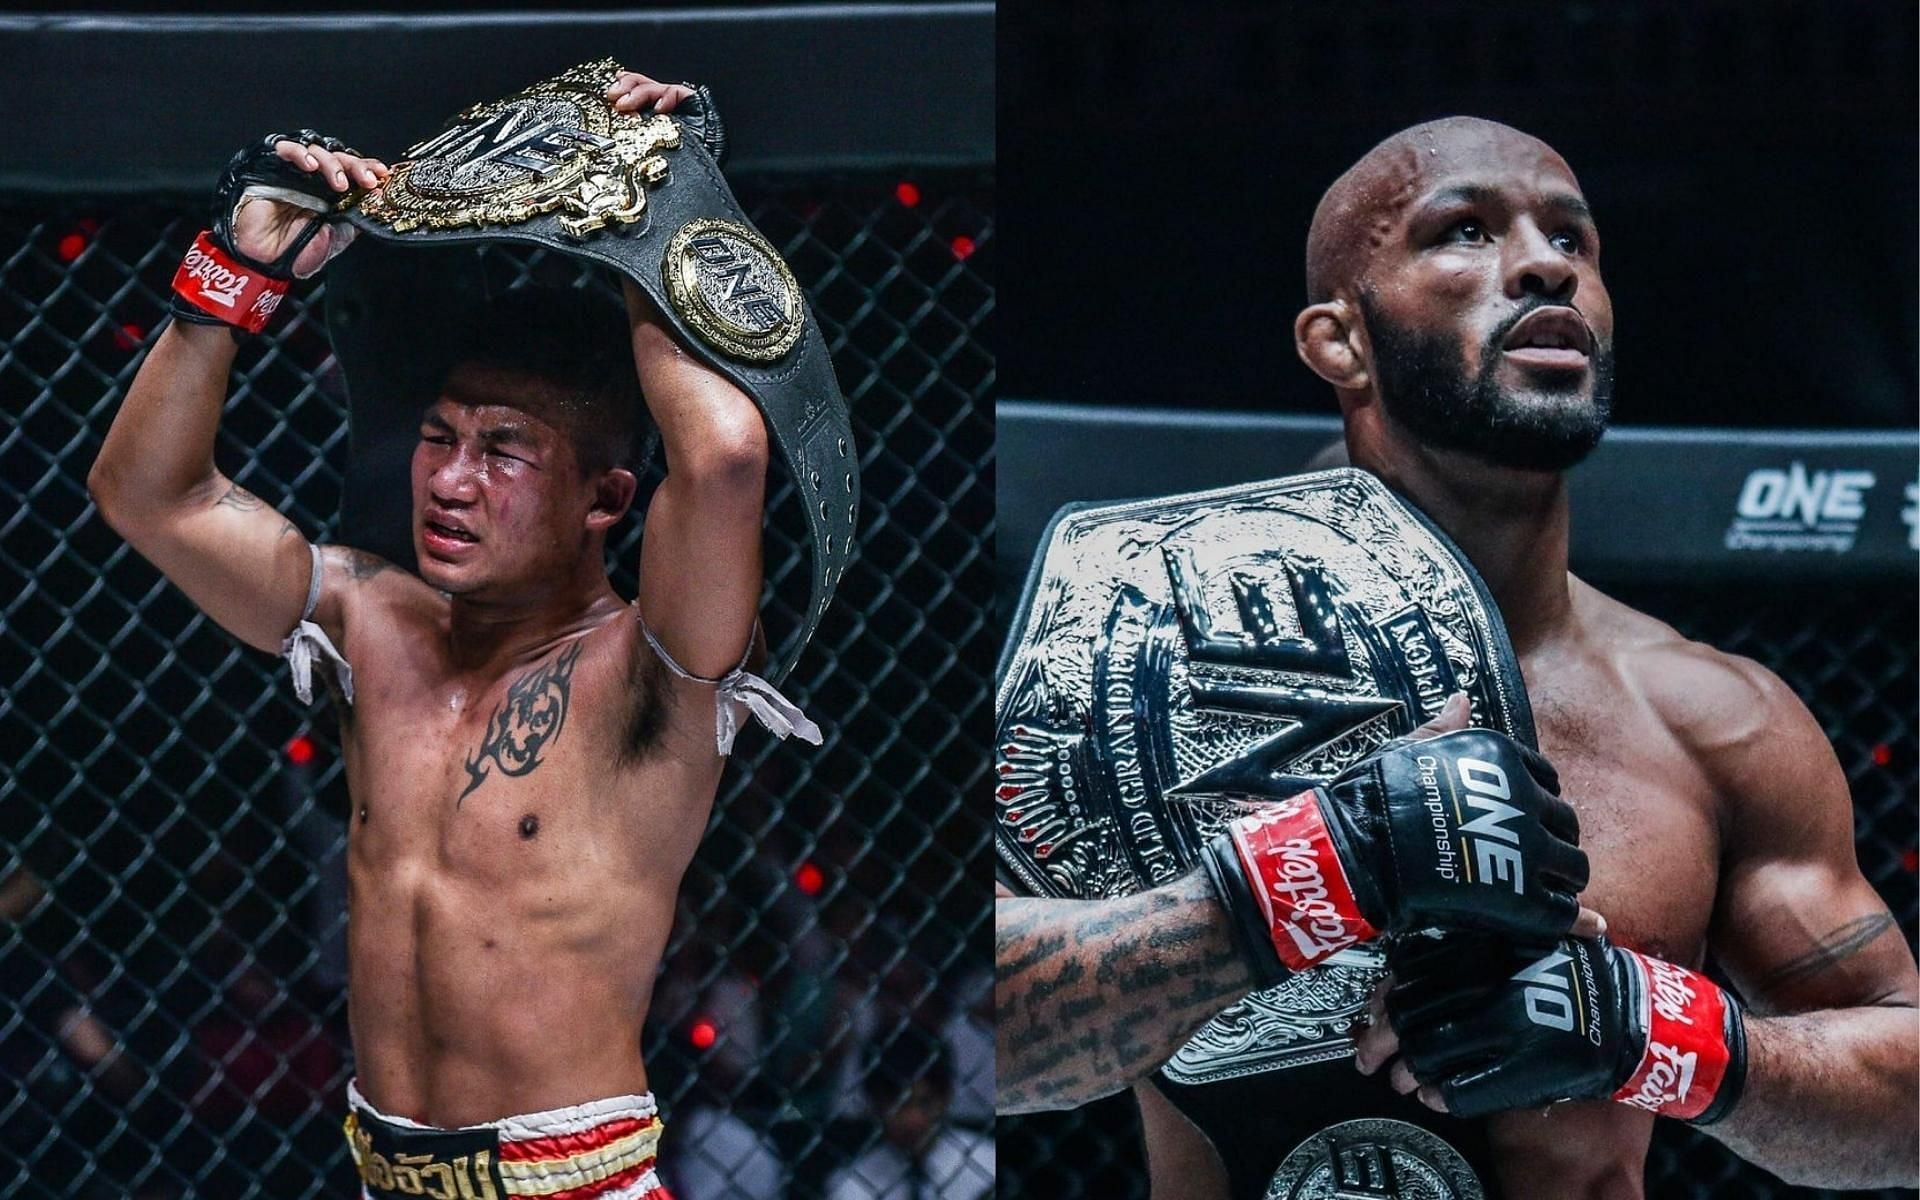 The special rules match between Rodtang Jitmuangnon (left) and Demetrious Johnson (right) is one of our most anticipated bouts in ONE: X. (Images courtesy of ONE Championship)